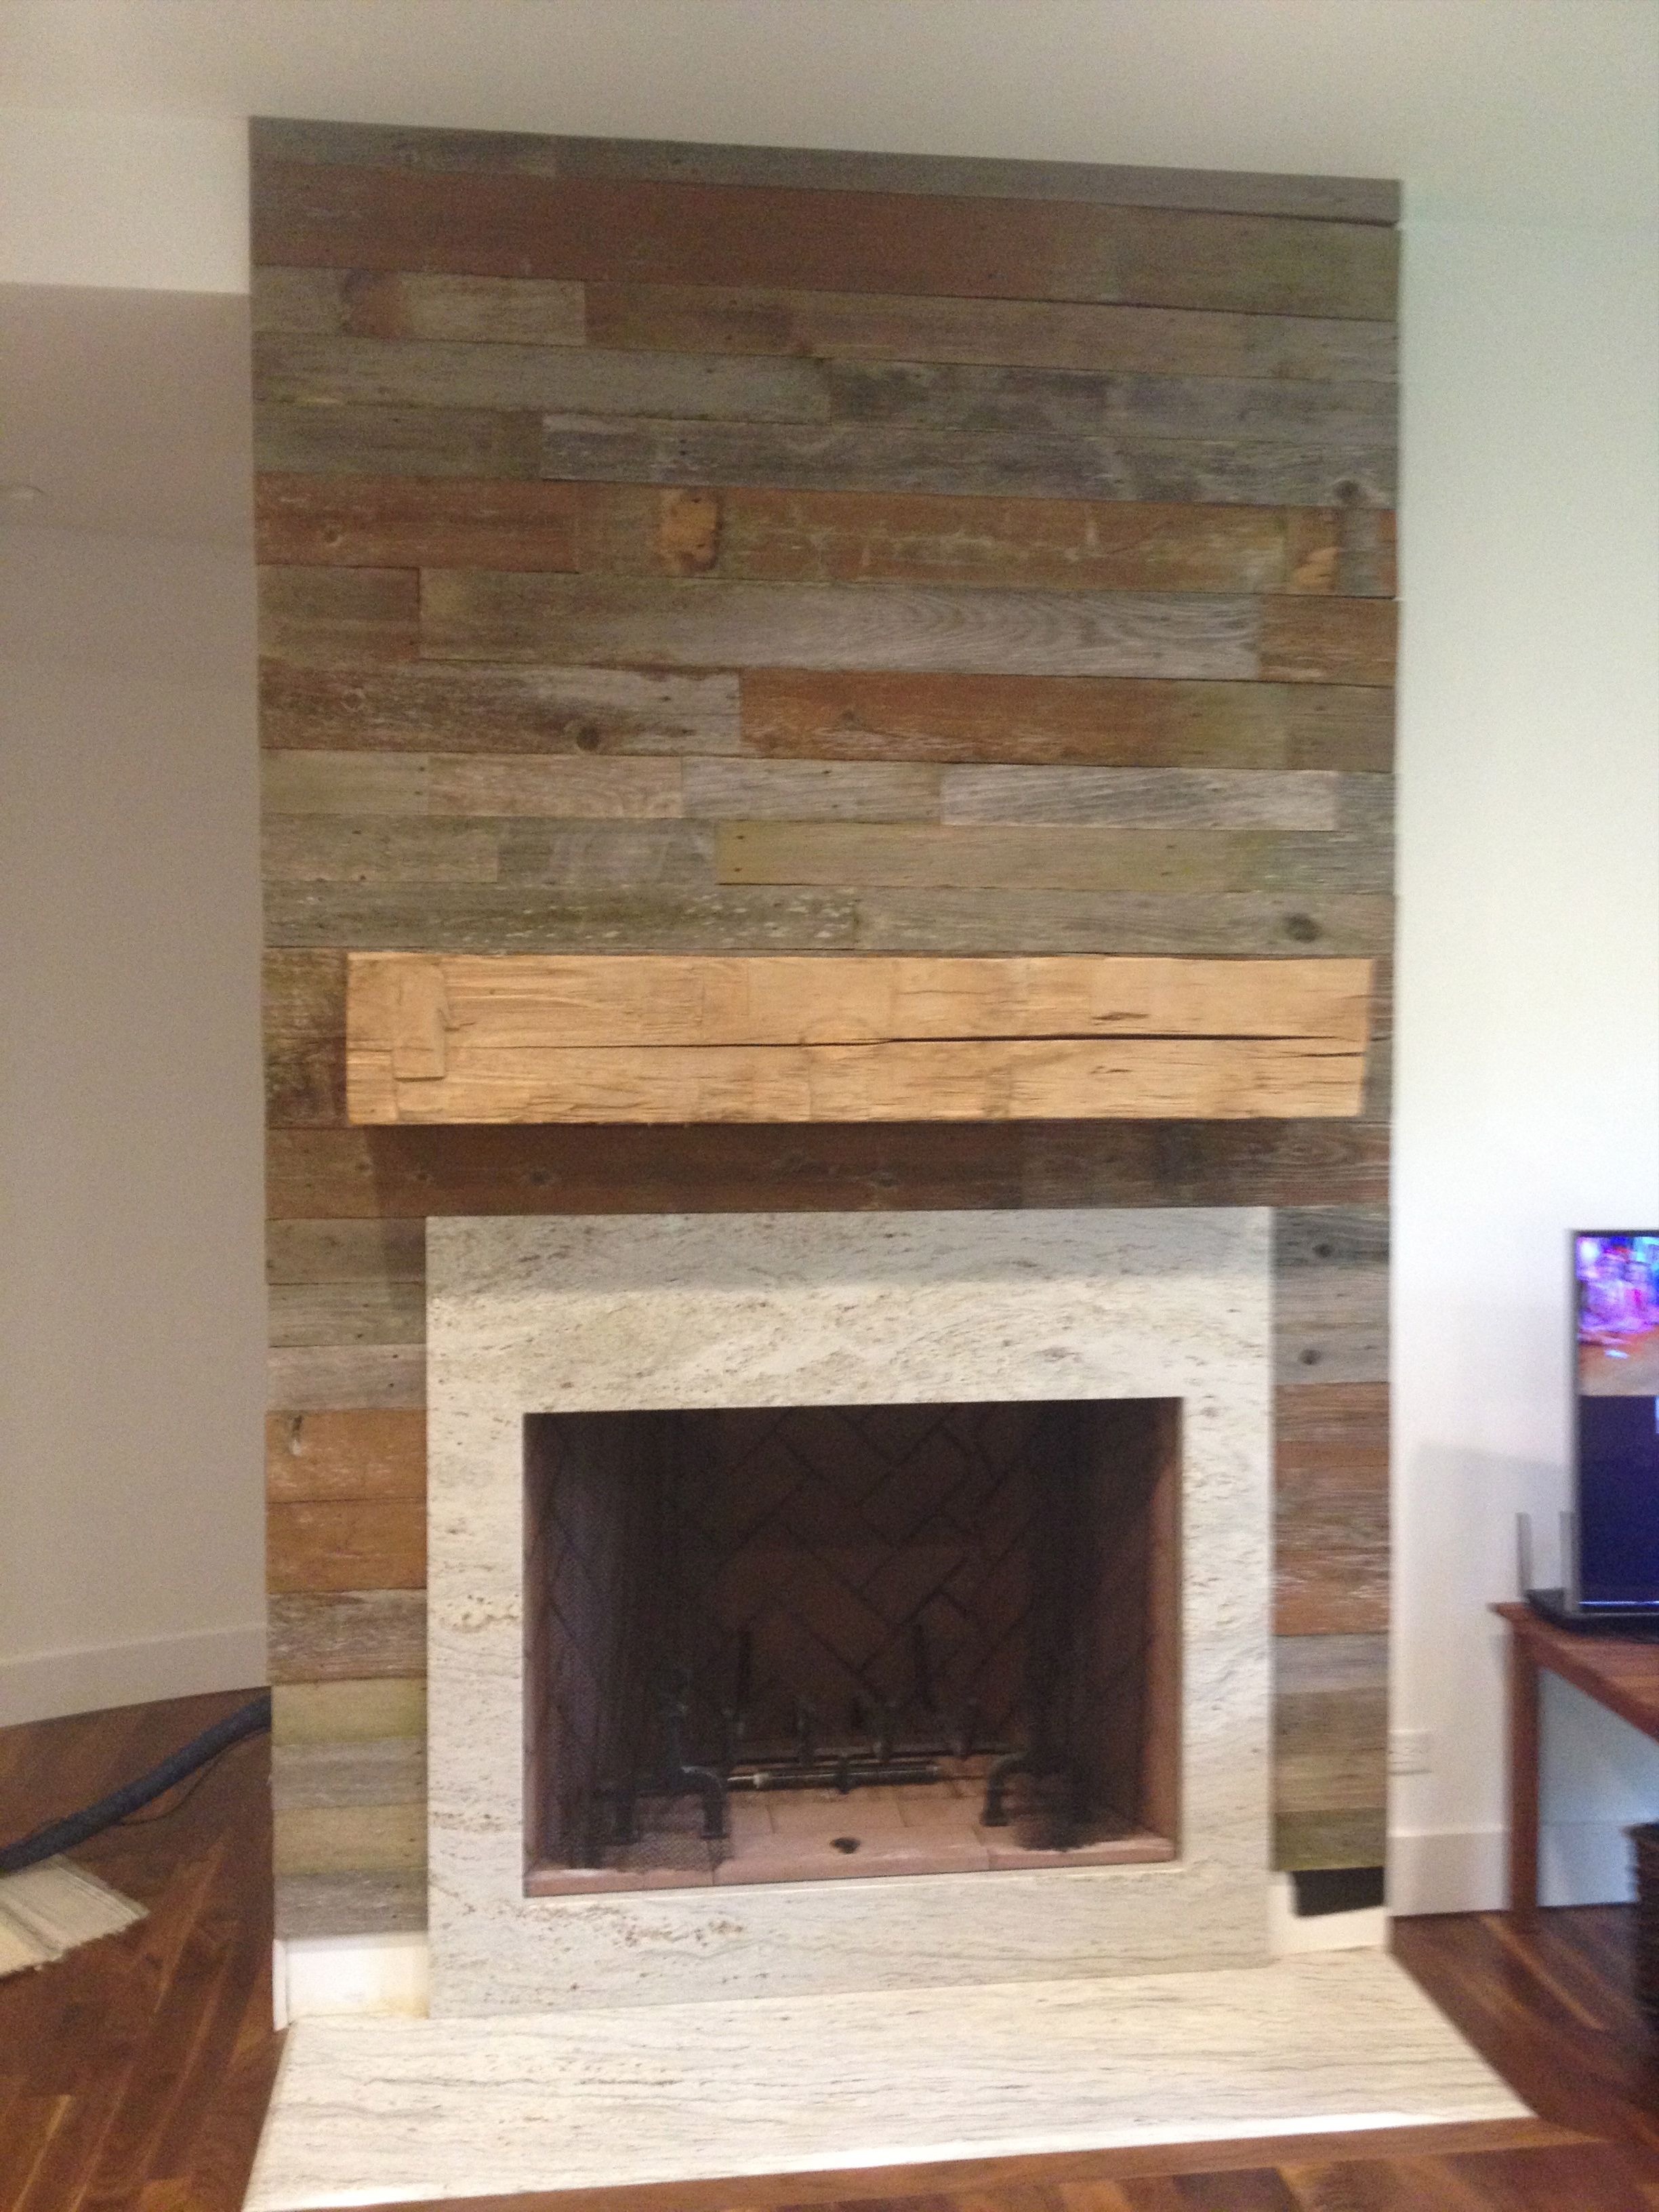 Reclaimed wood fireplace surround and mantel. | Fireplaces ...